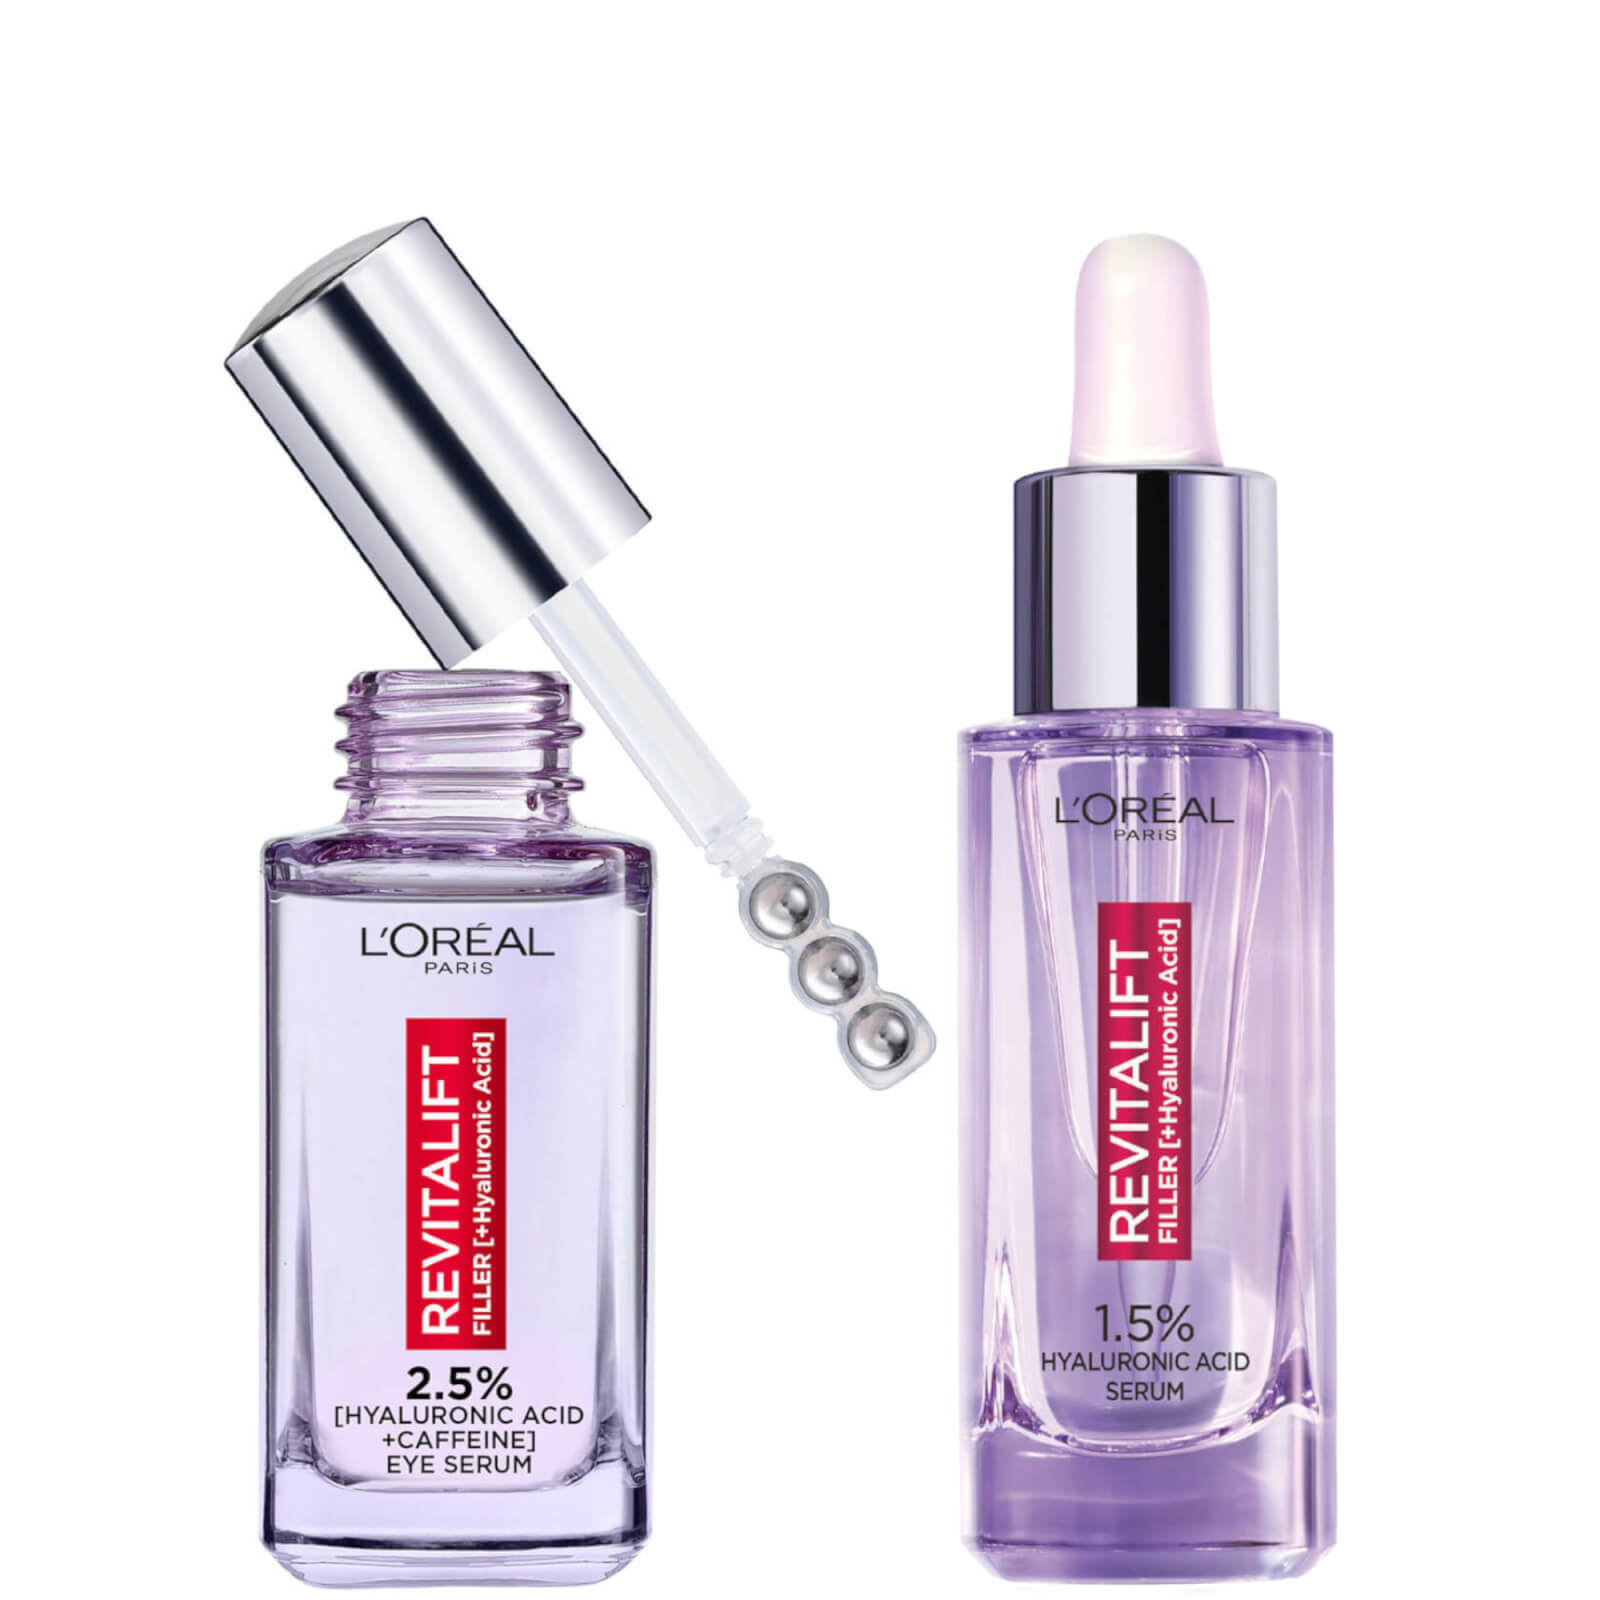 L'Oreal Paris Hydration Heroes Face and Eye Serum Duo with Hyaluronic Acid and Caffeine